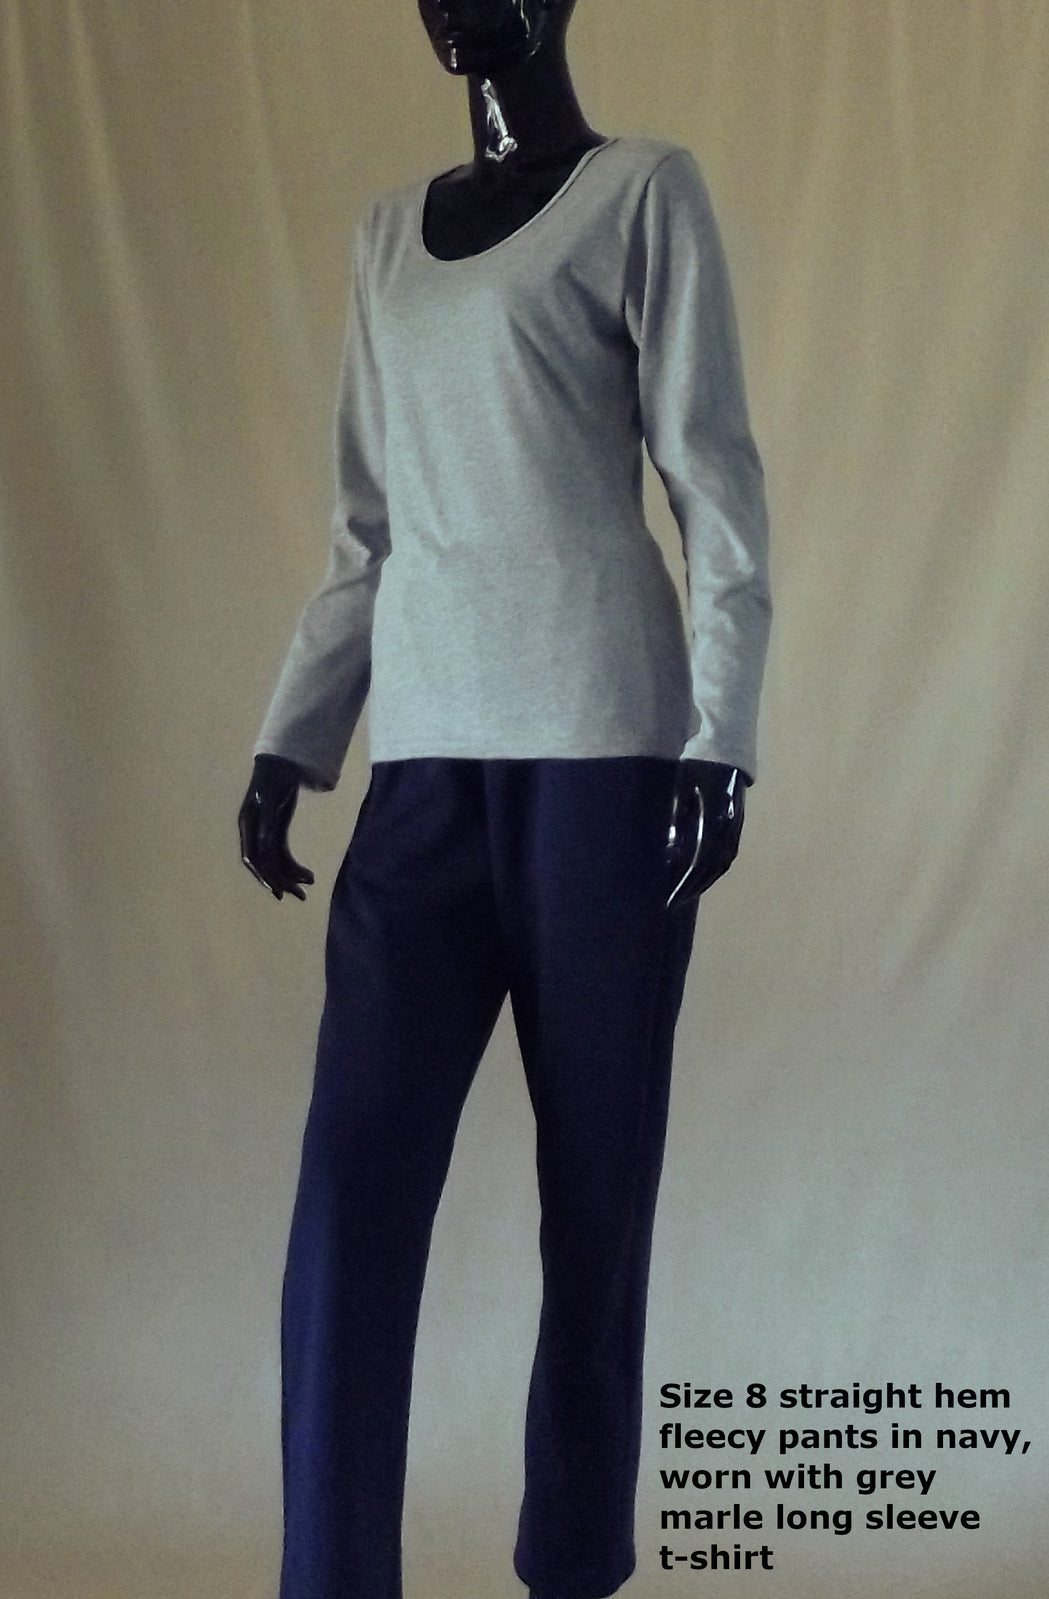 women's navy fleecy pants with grey marle long sleeve womens cotton top